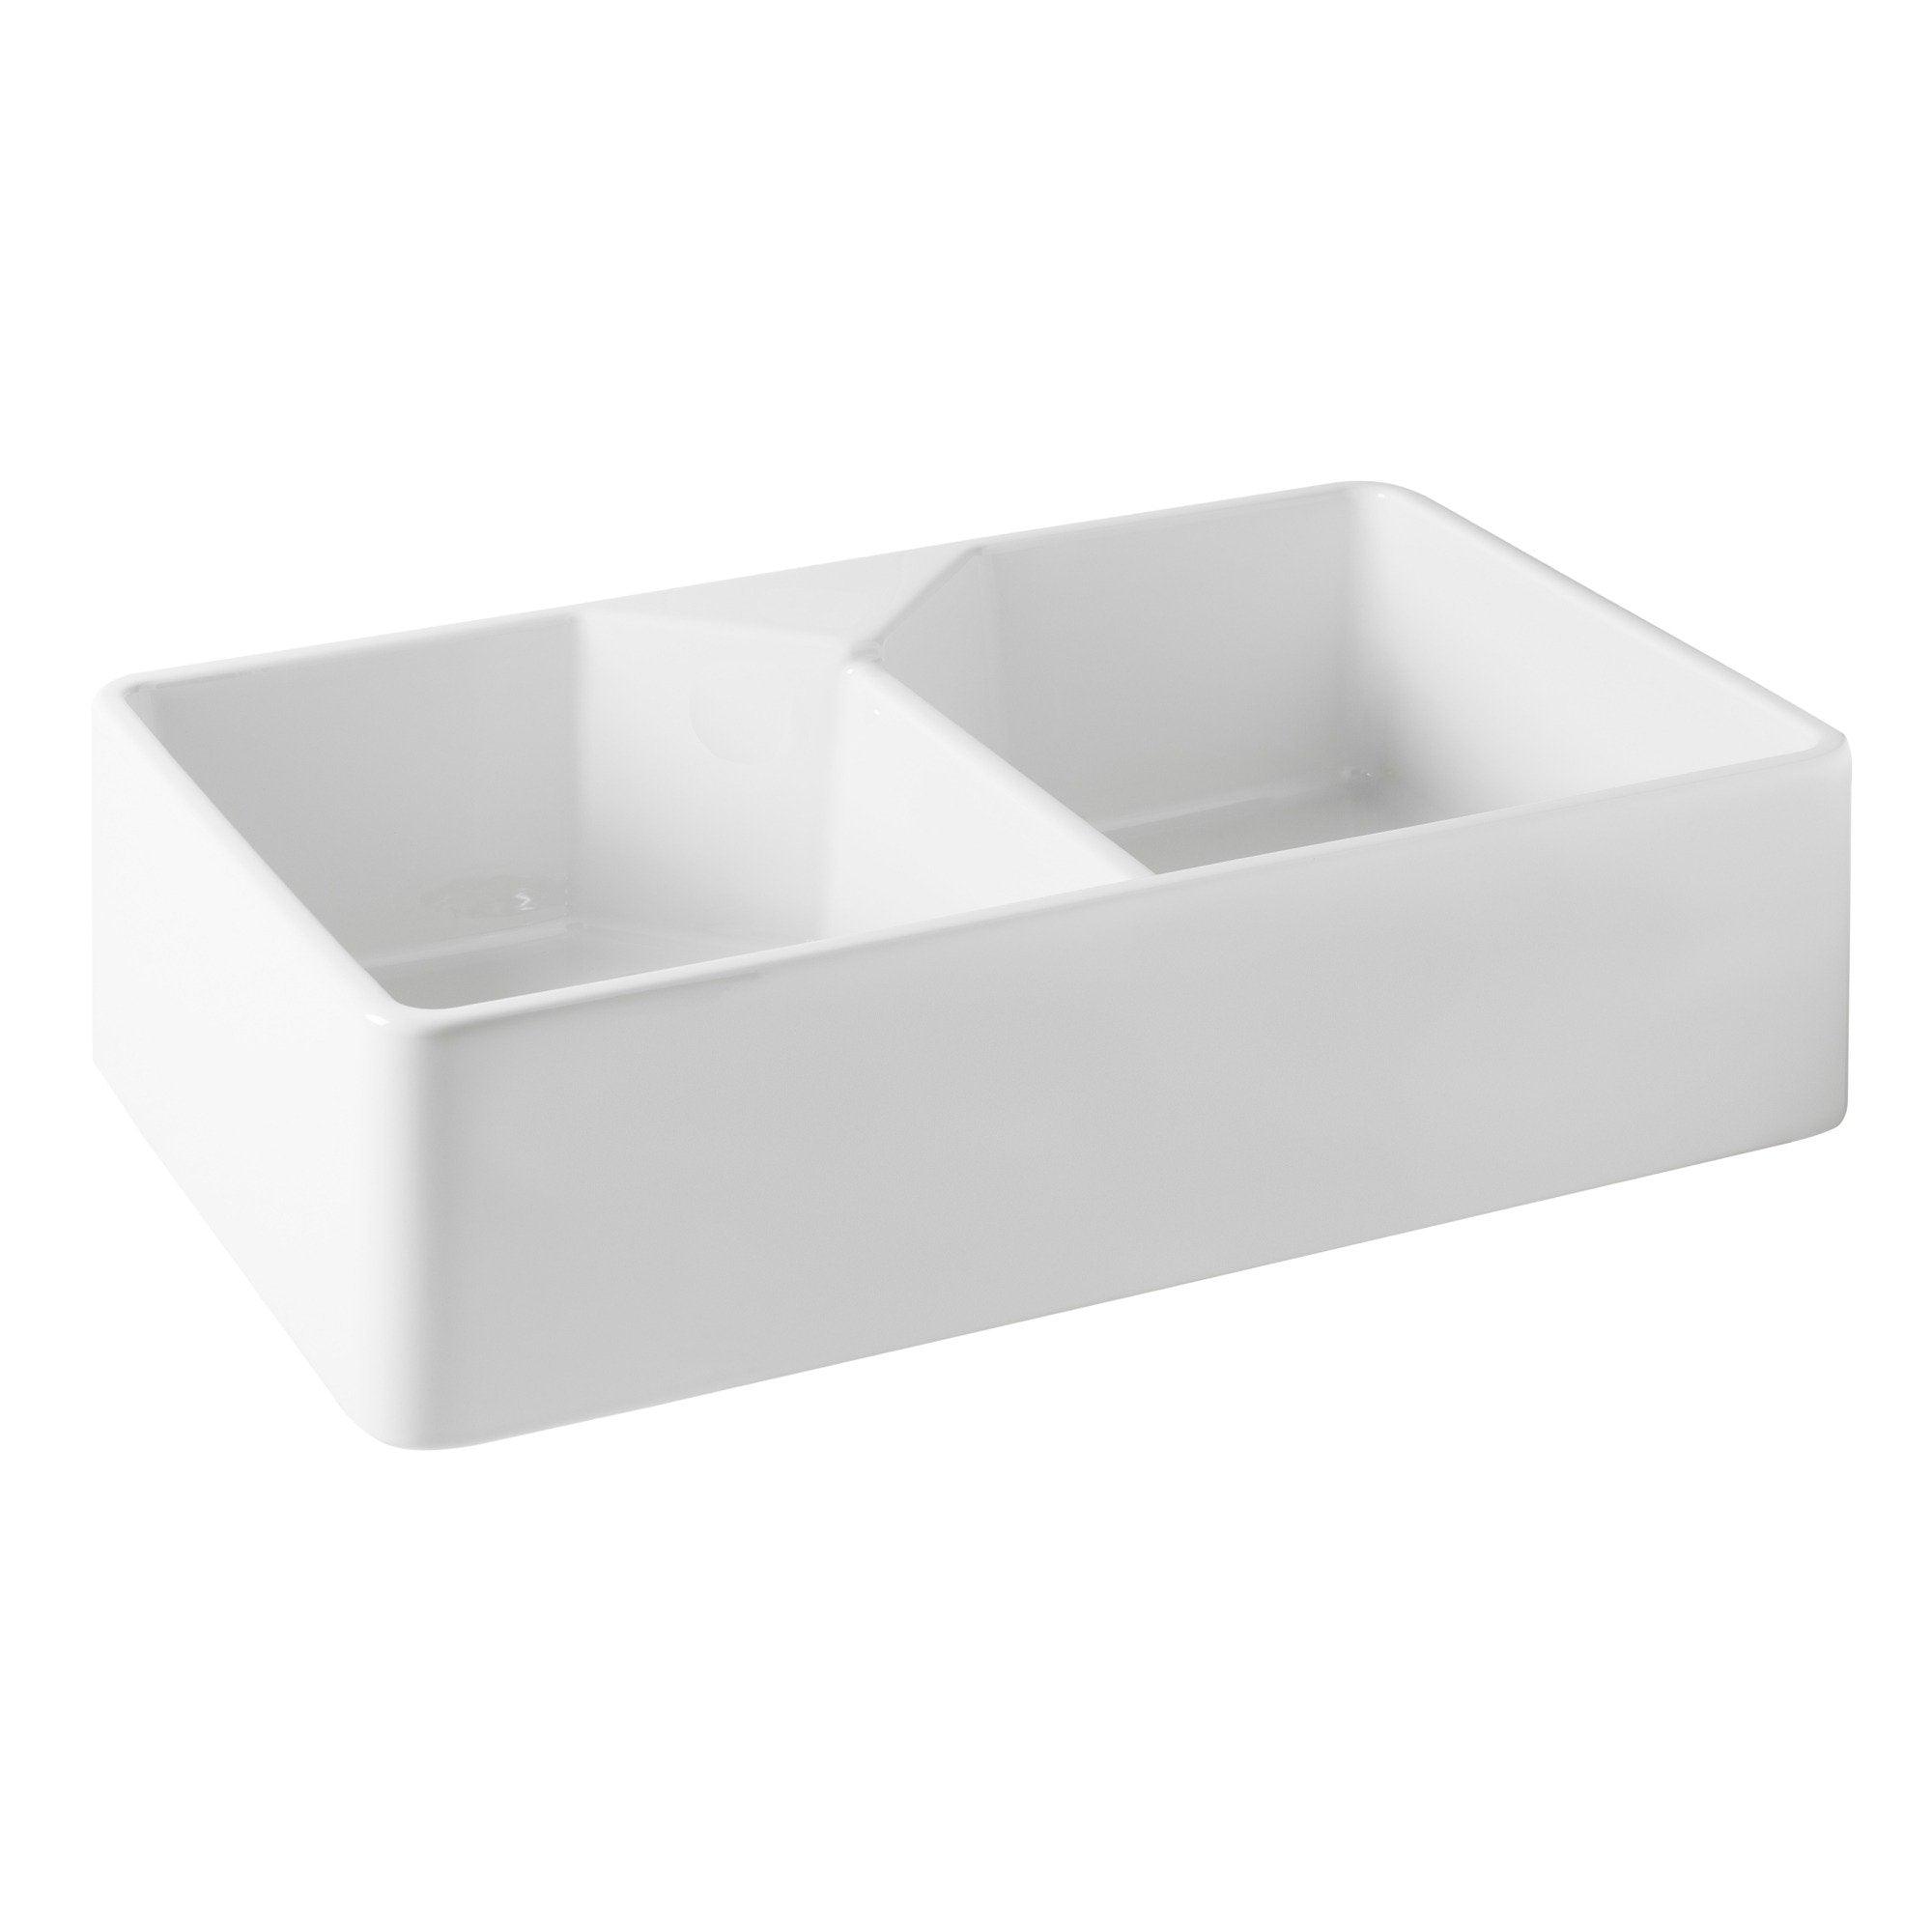 T&H CHESTER 80 X 50 DOUBLE BOWL FIRECLAY SINK 0TH NO OVERFLOW - Burdens Plumbing